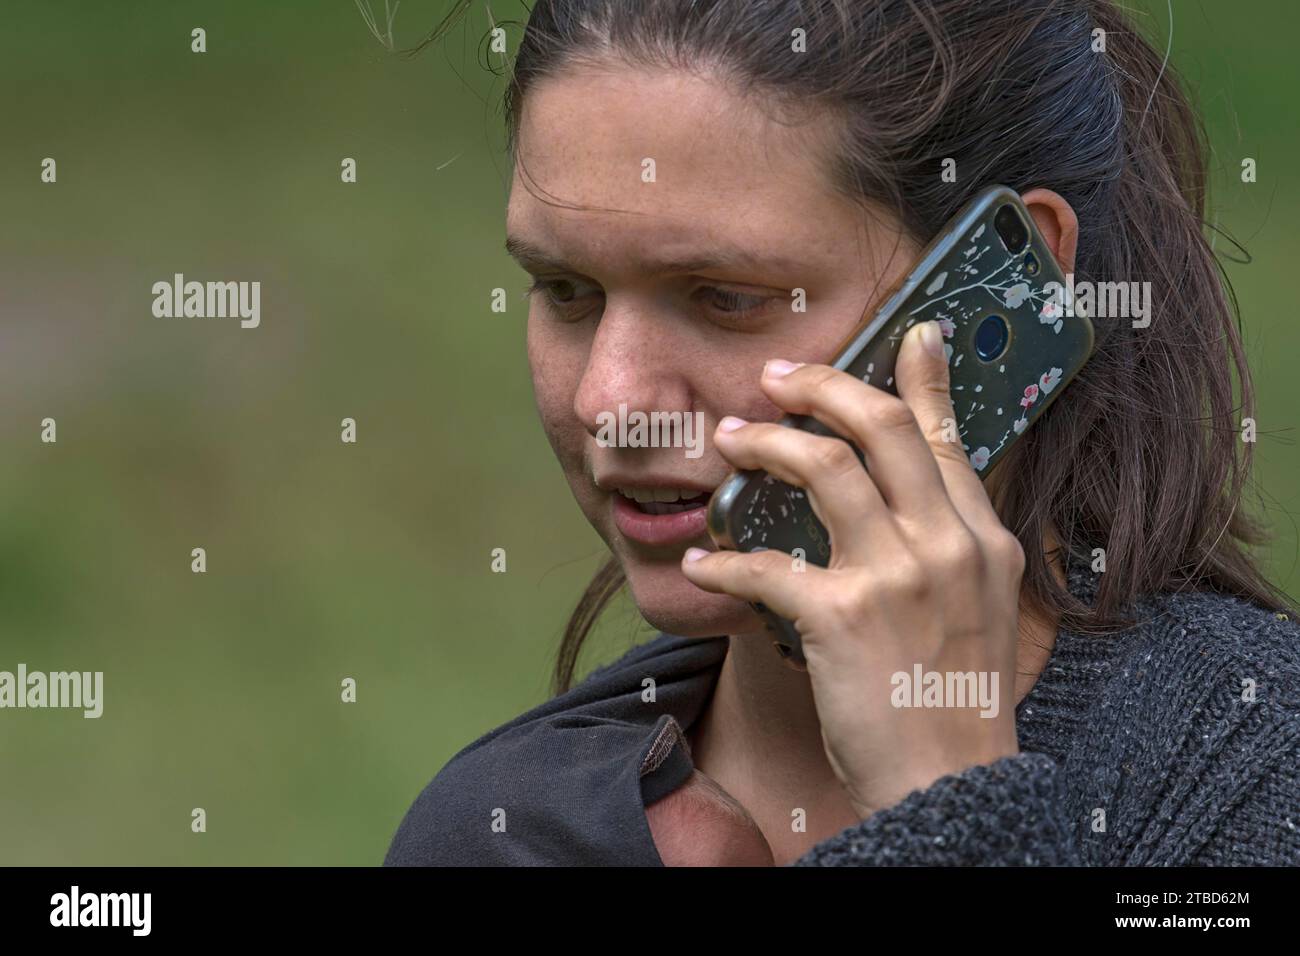 Young woman using a smartphone, Mecklenburg-Western Pomerania, Germany Stock Photo